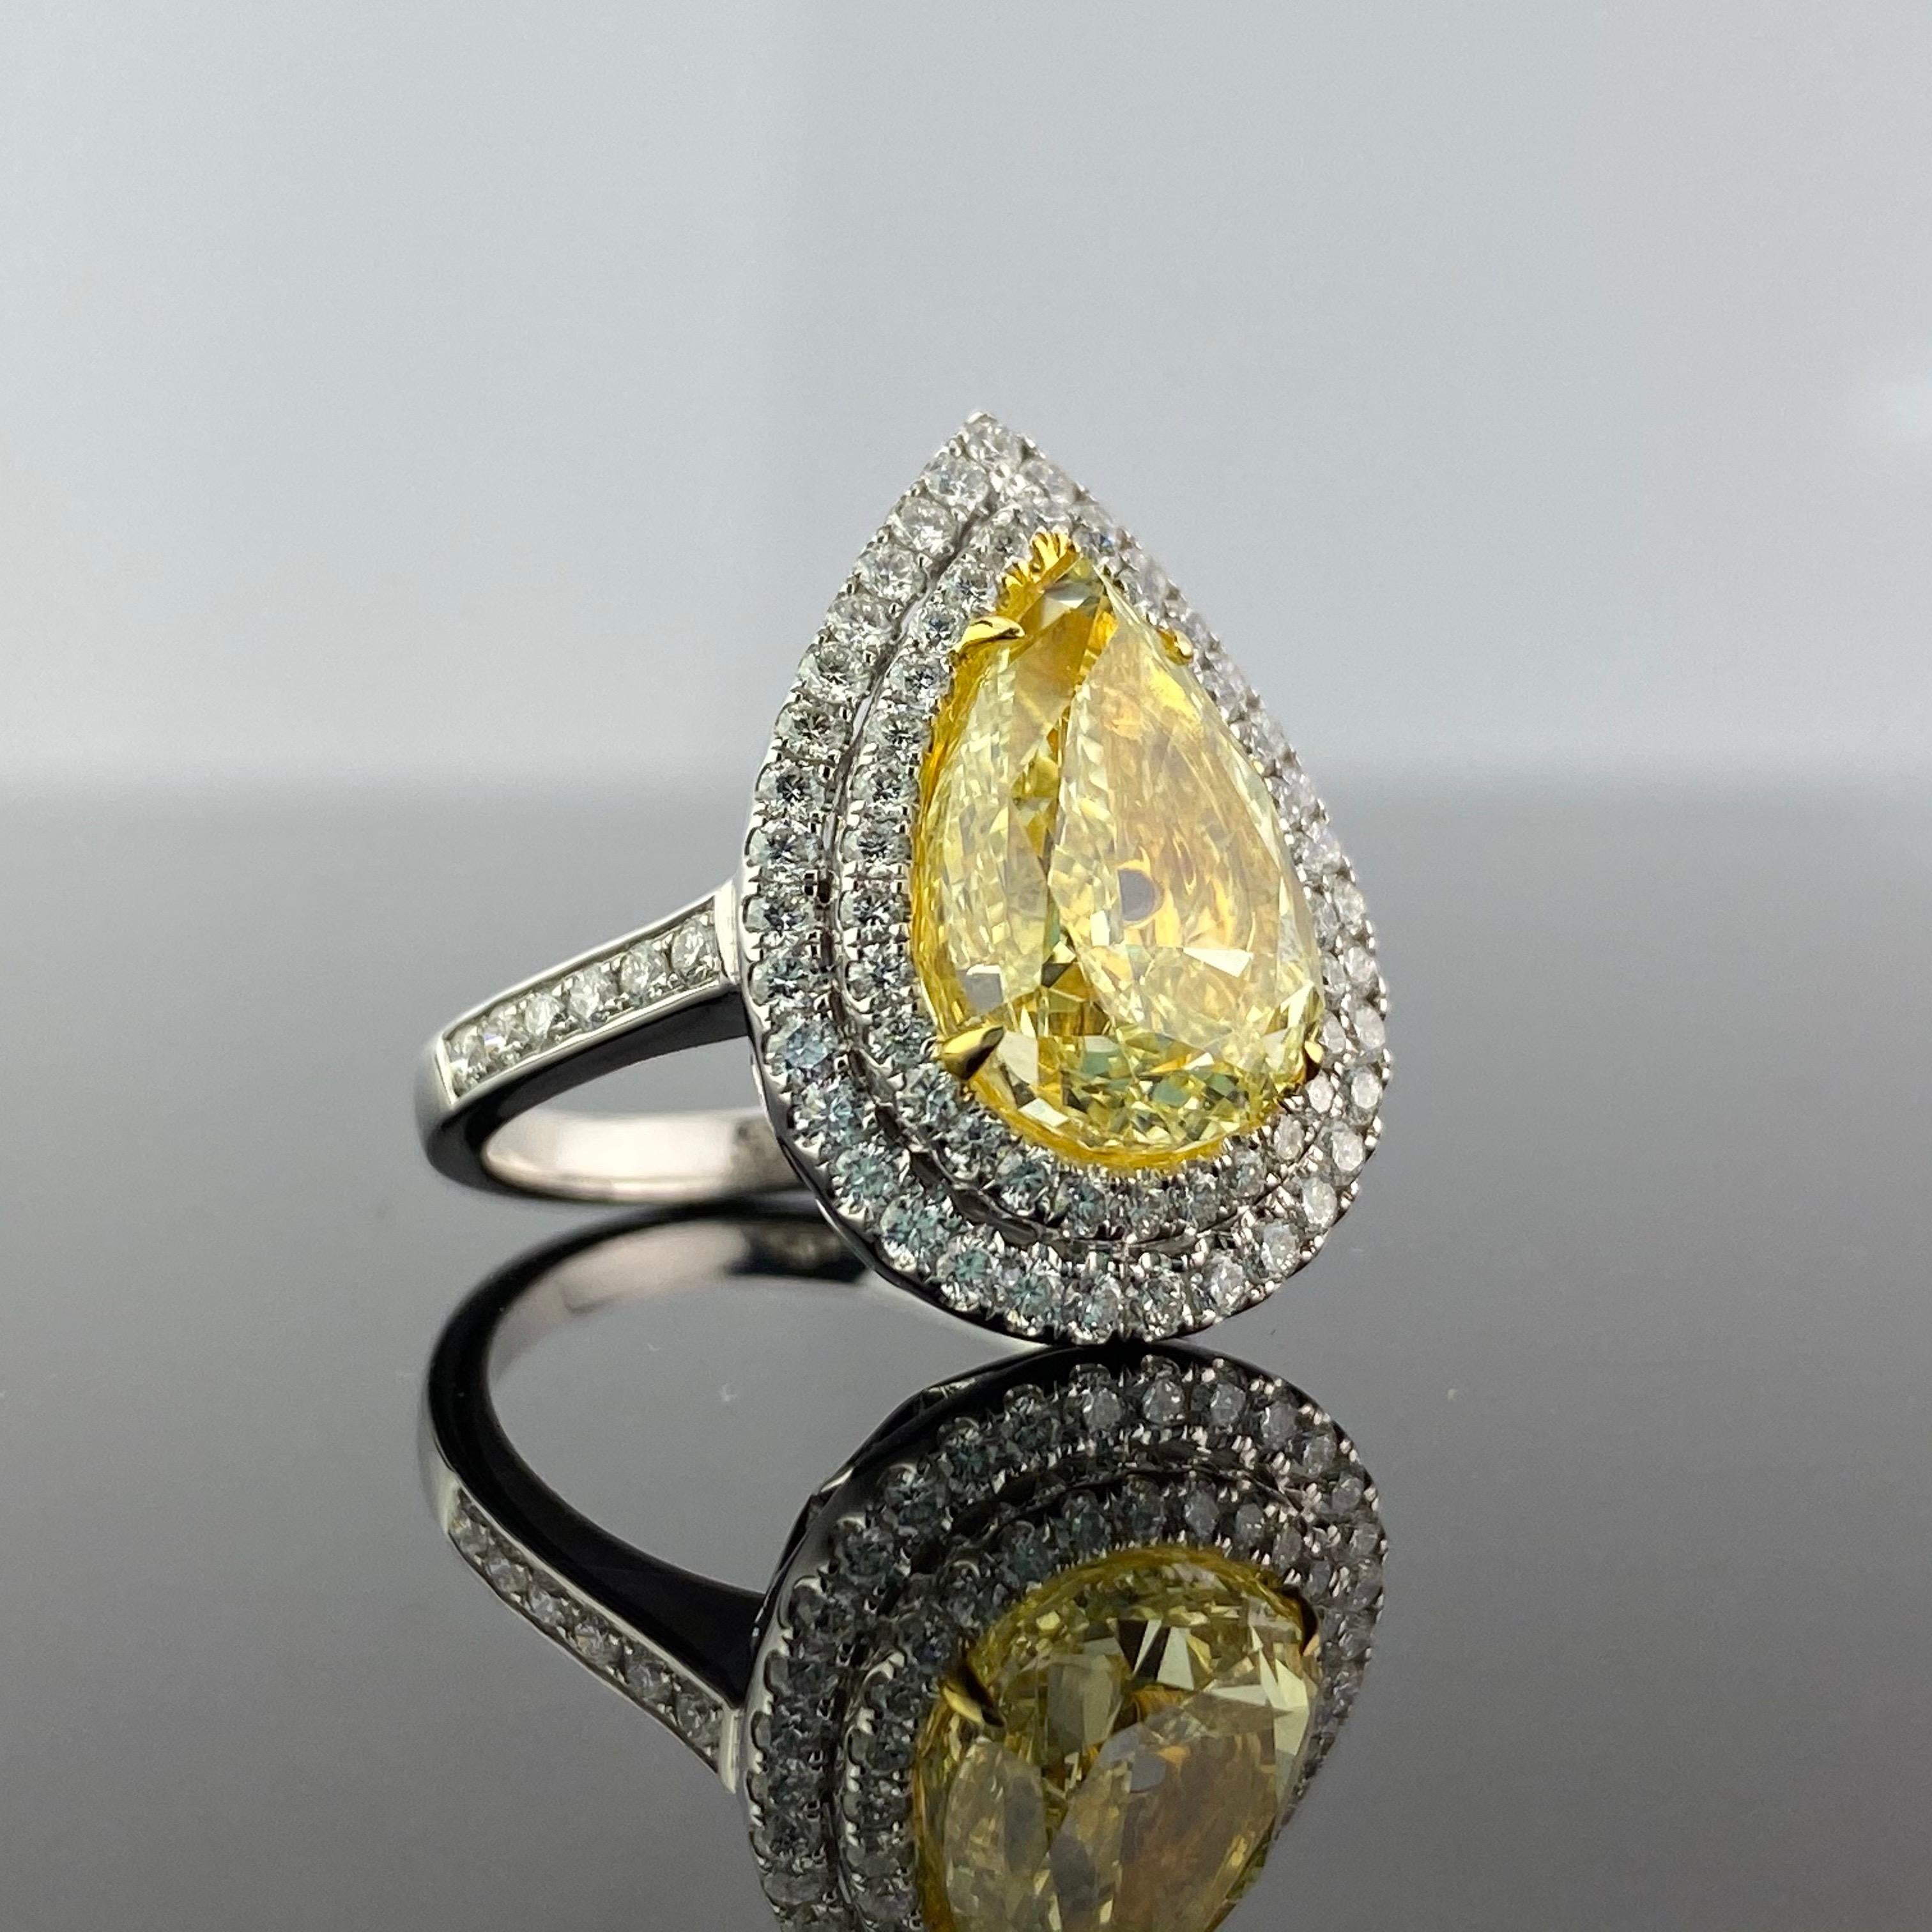 A stunning 5.02 carat, GIA certified Yellow Diamond Engagement Ring. The centre stone is of Y-Z colour, VS2 clarity. There are 0.92 carat of colorless White Diamonds, set in 7.57 grams of solid 18K White Gold. Currently size US 6.5, free resizing